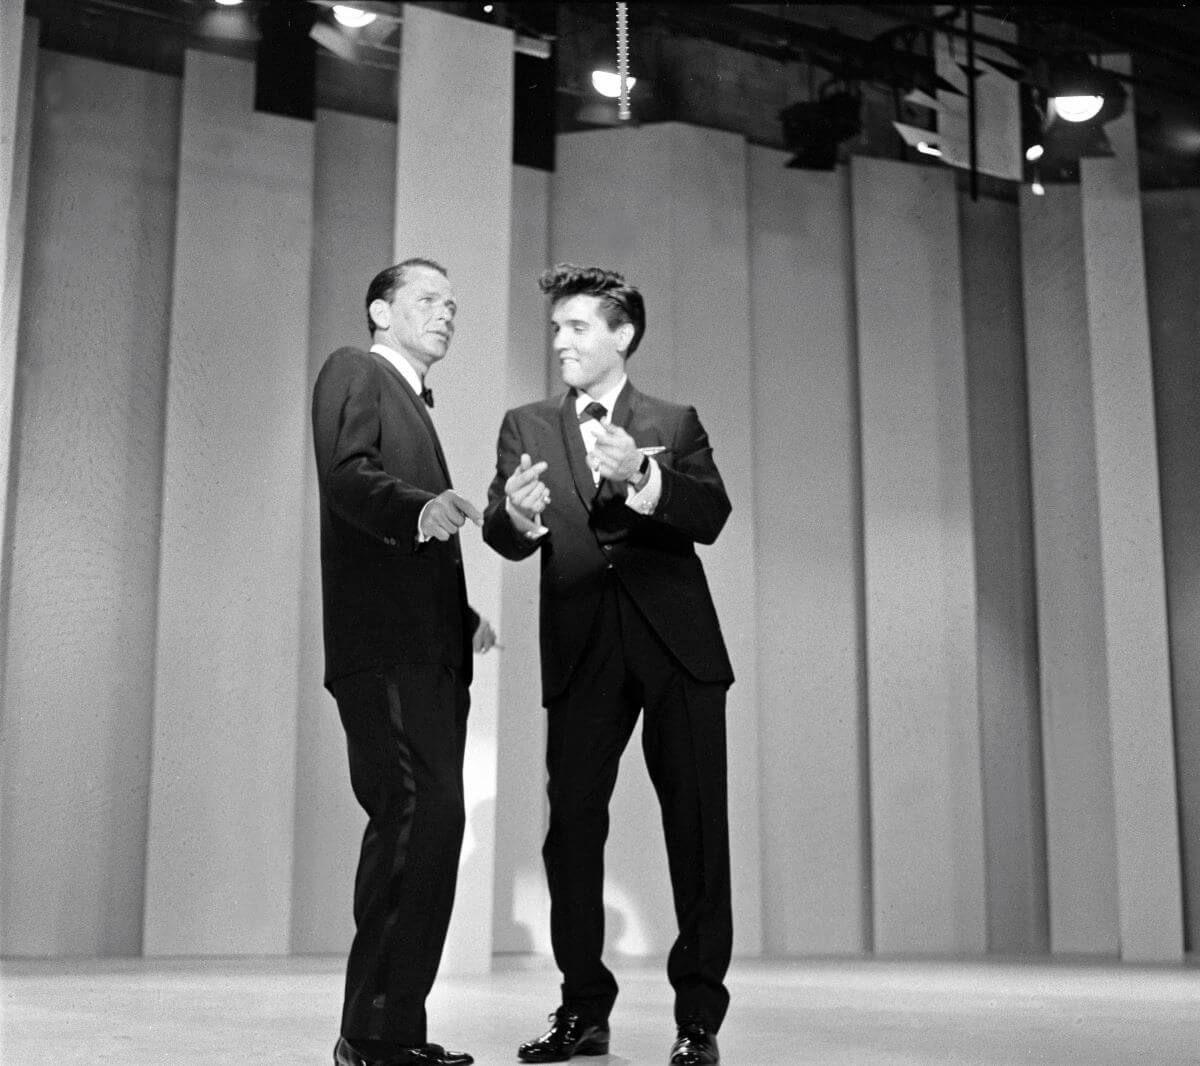 A black and white picture of Frank Sinatra and Elvis wearing tuxedos and dancing on a sound stage.